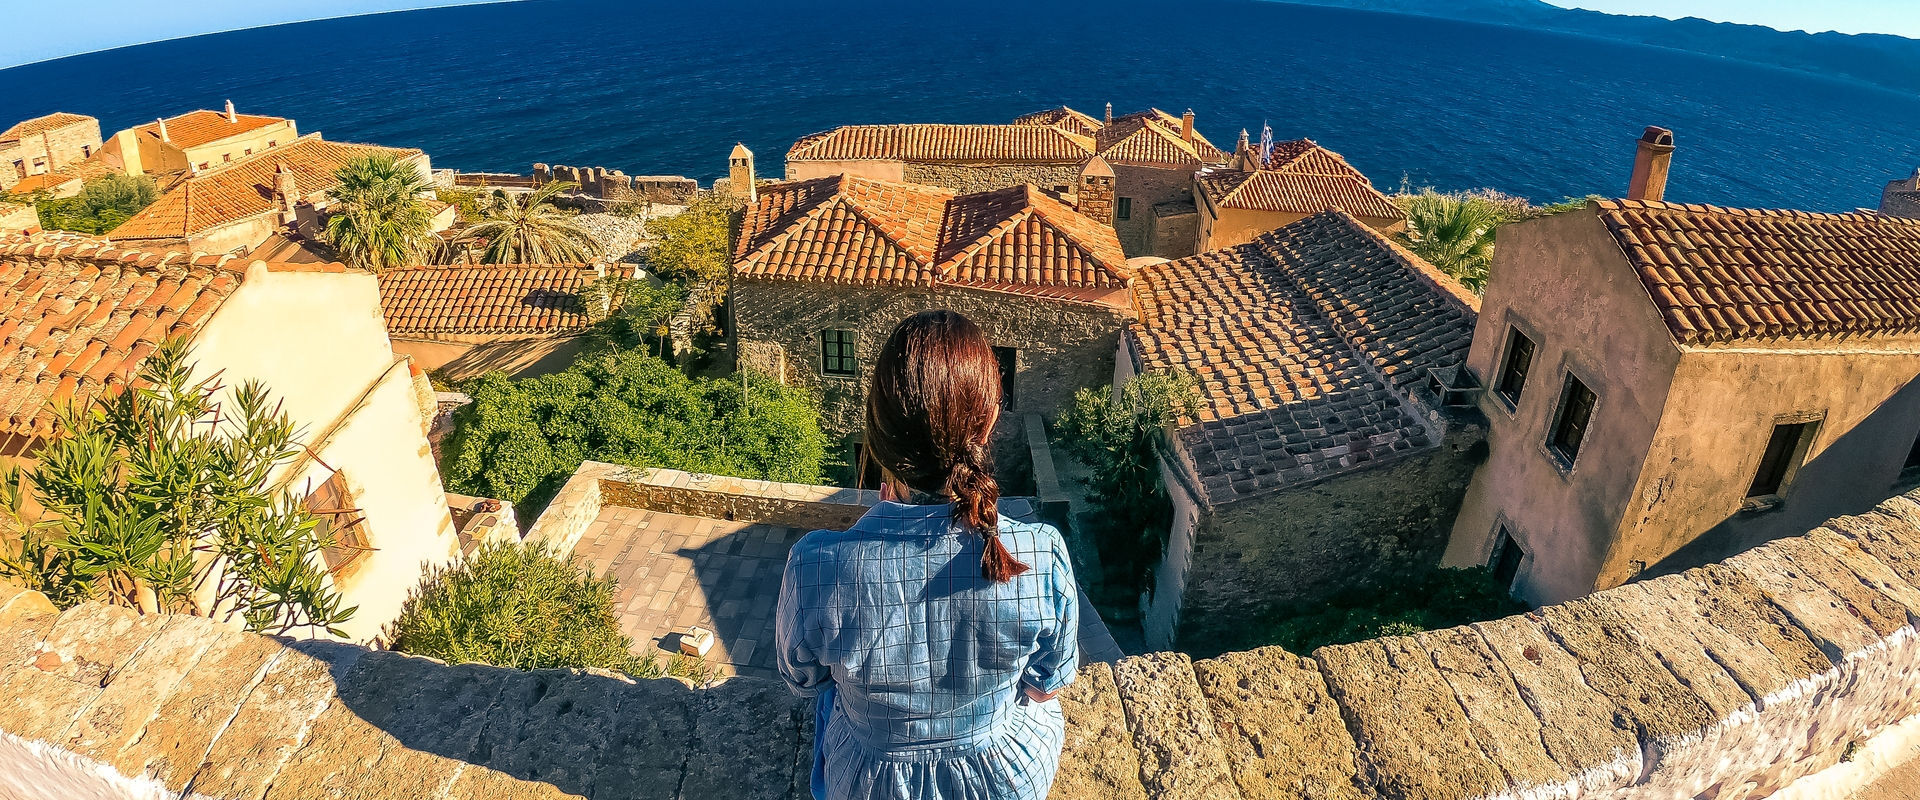 Maria gazing the sea from Monemvasia's most instagrammable spot